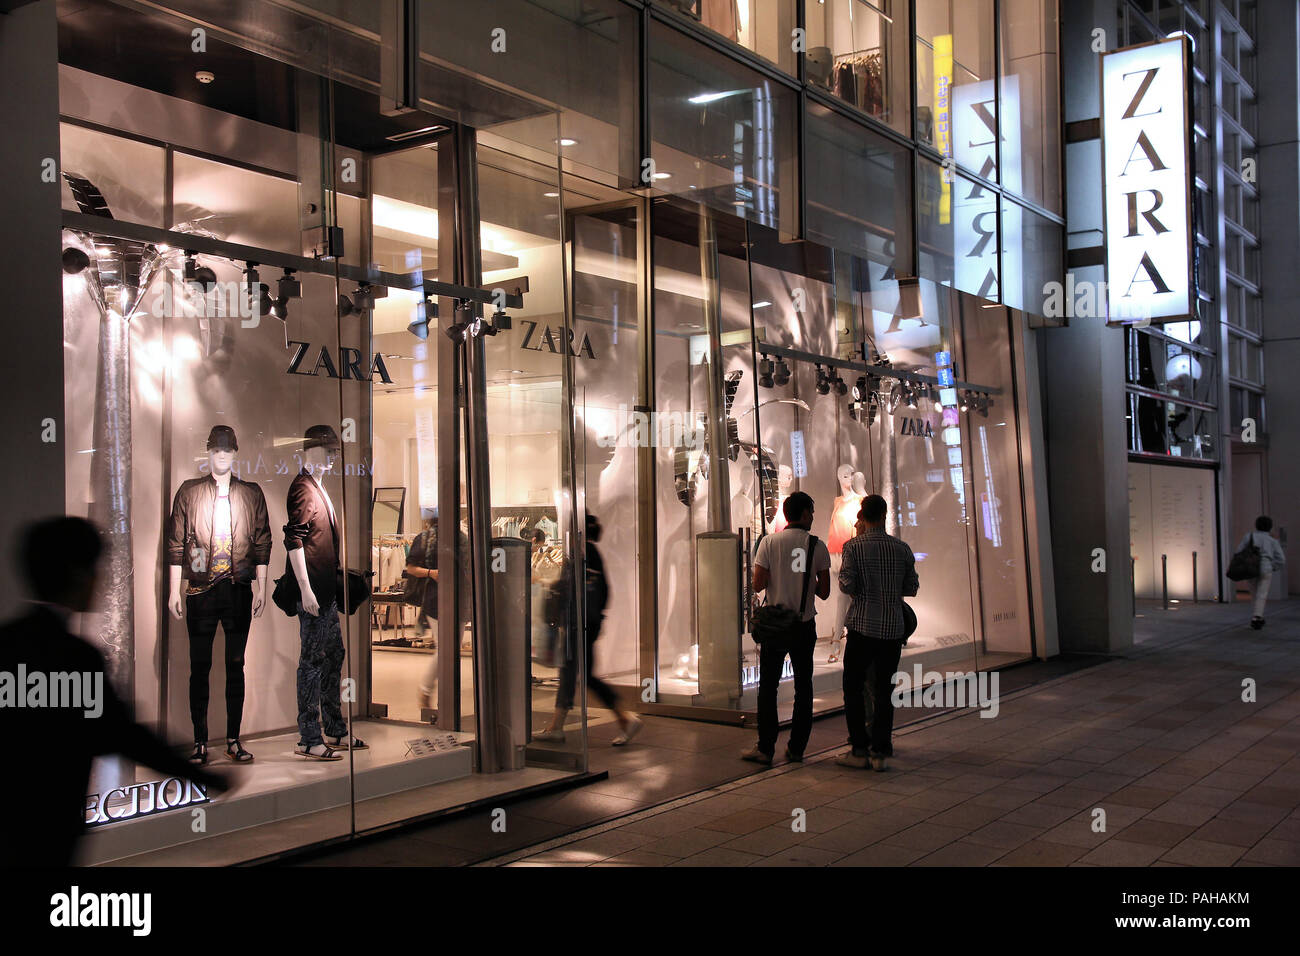 TOKYO - MAY 8: Shoppers visit Zara store on May 8, 2012 in Tokyo. Zara was  founded in 1975 and is present in 73 countries today (2012). It had 1.18 bi  Stock Photo - Alamy